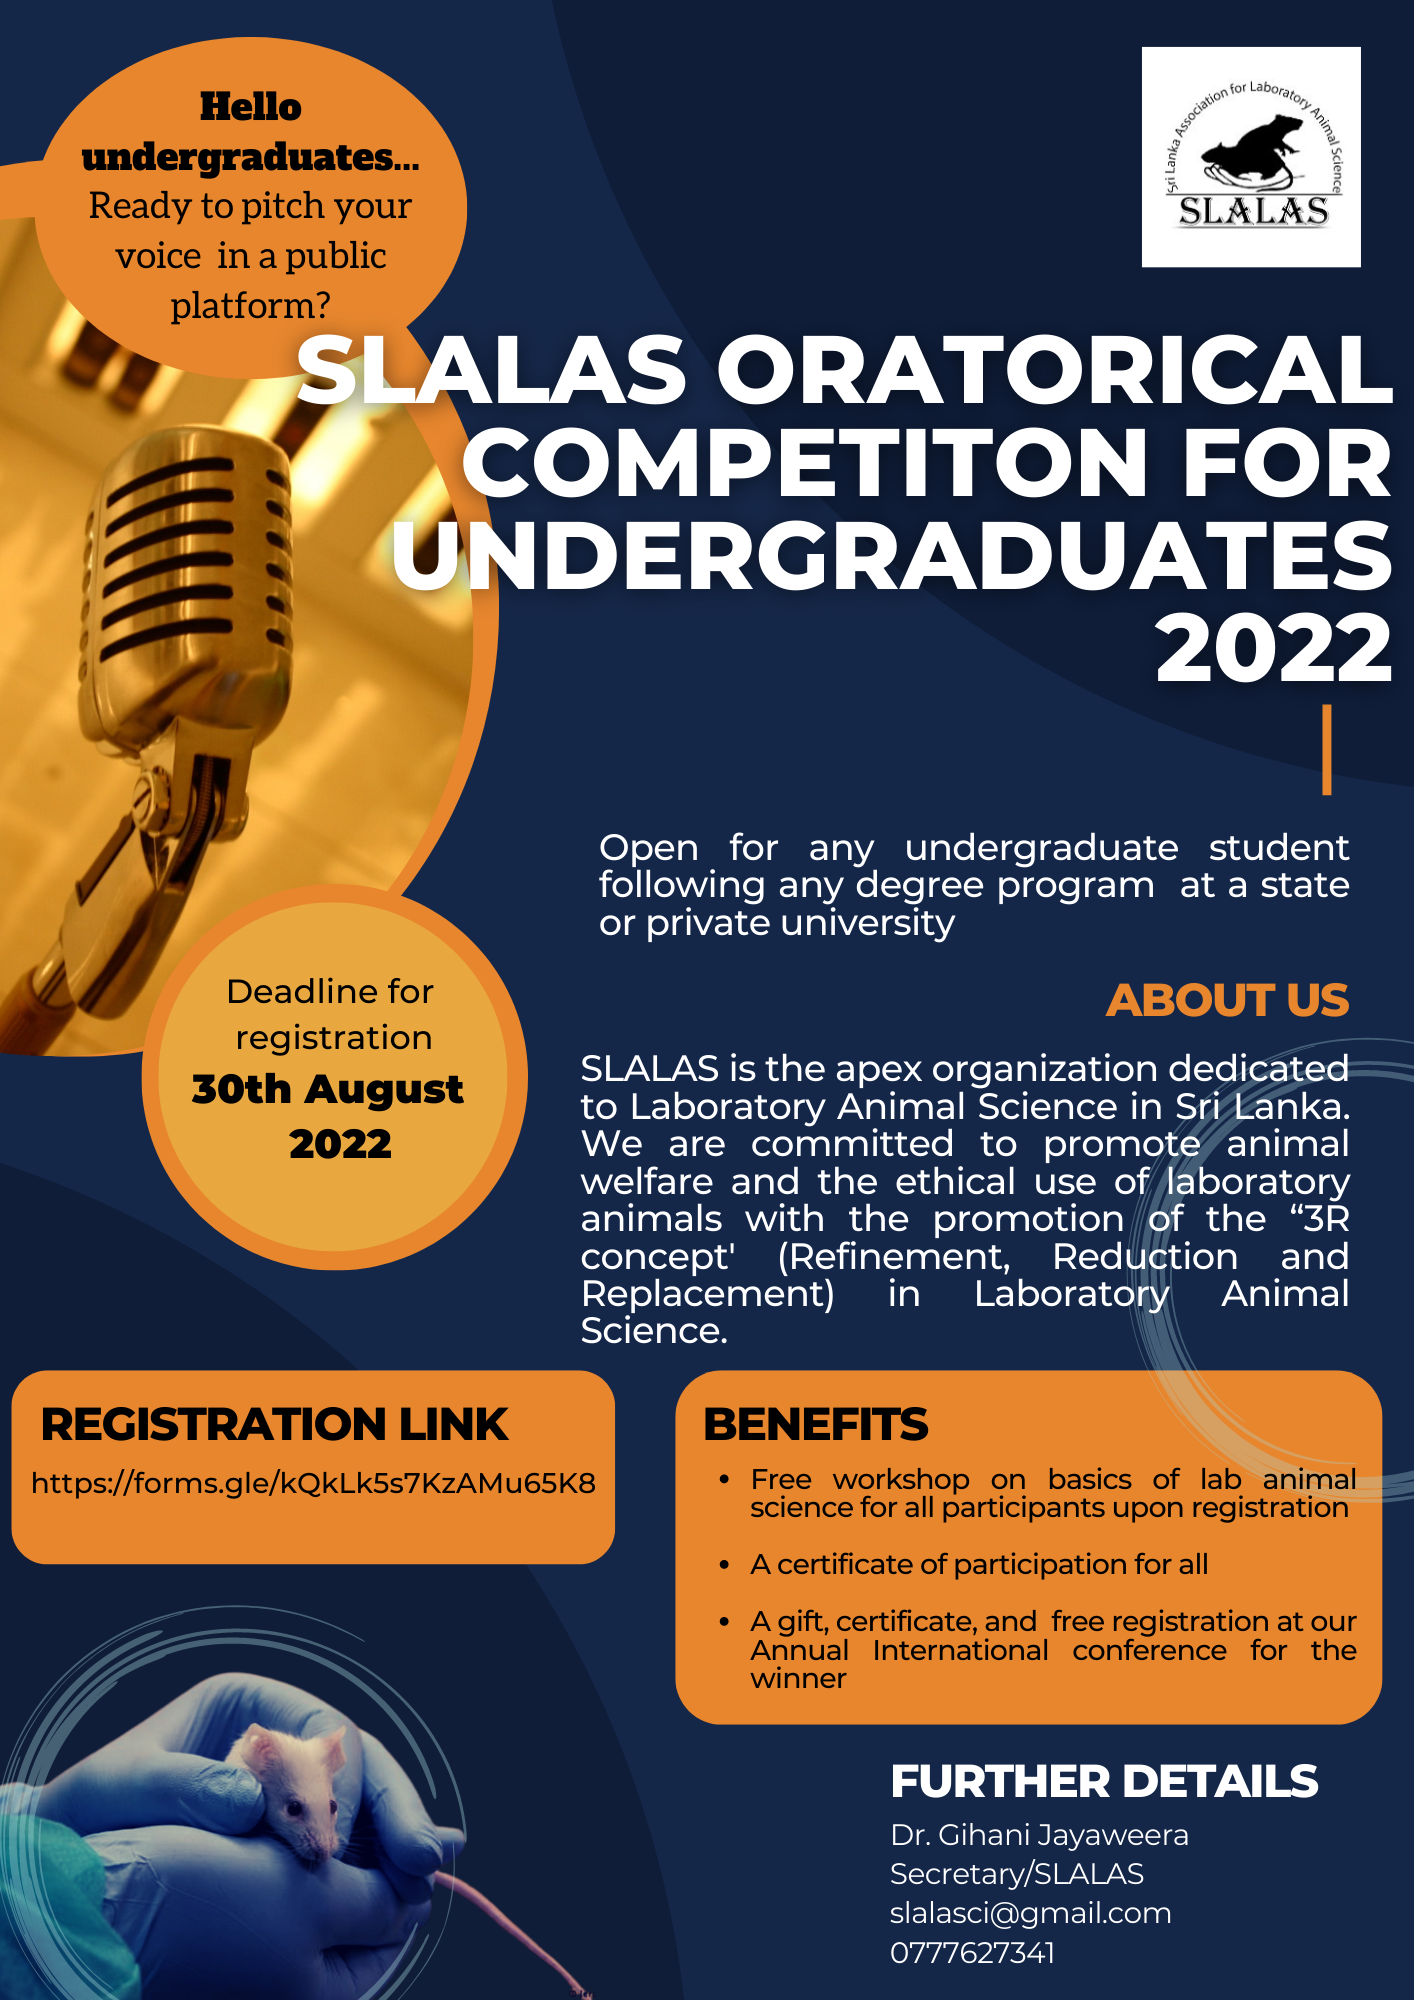 Eligibility Undergraduates of state and private universities and any higher educational institute   Registration link https://forms.gle/kQkLk5s7KzAMu65K8  Registration deadline 30th August 2022  More details https://www.facebook.com/slalasci/